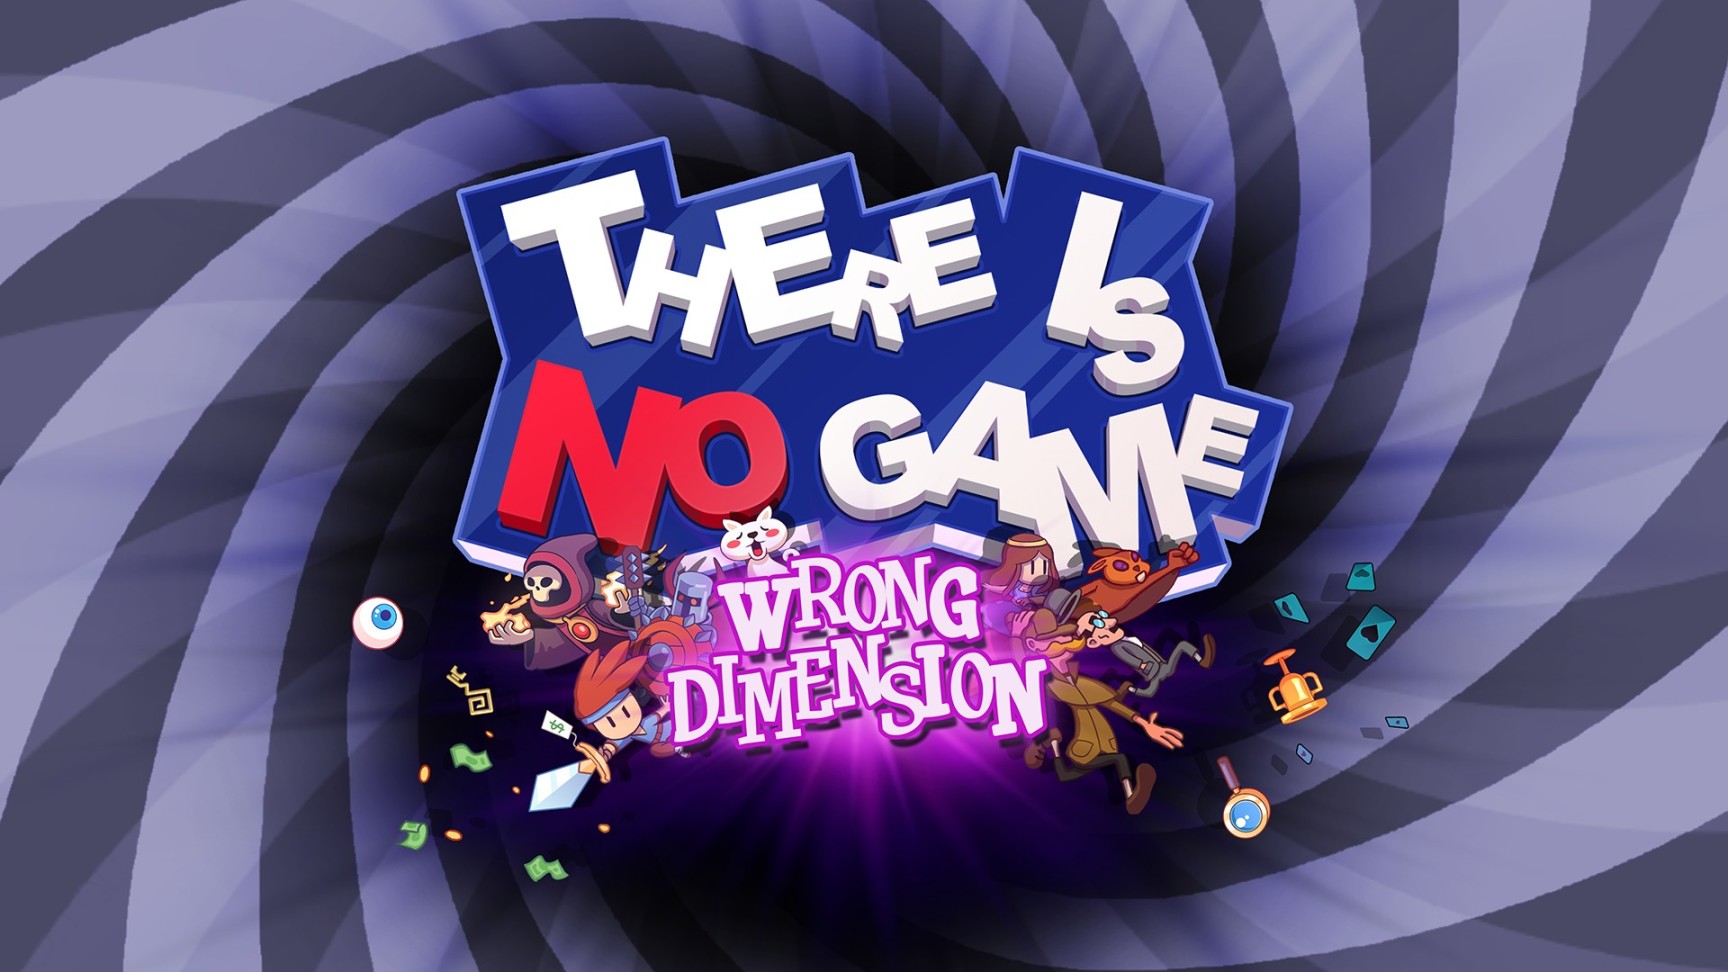 《There Is No Game : Wrong Dimension》：一封献给玩家与游戏制作者的情书